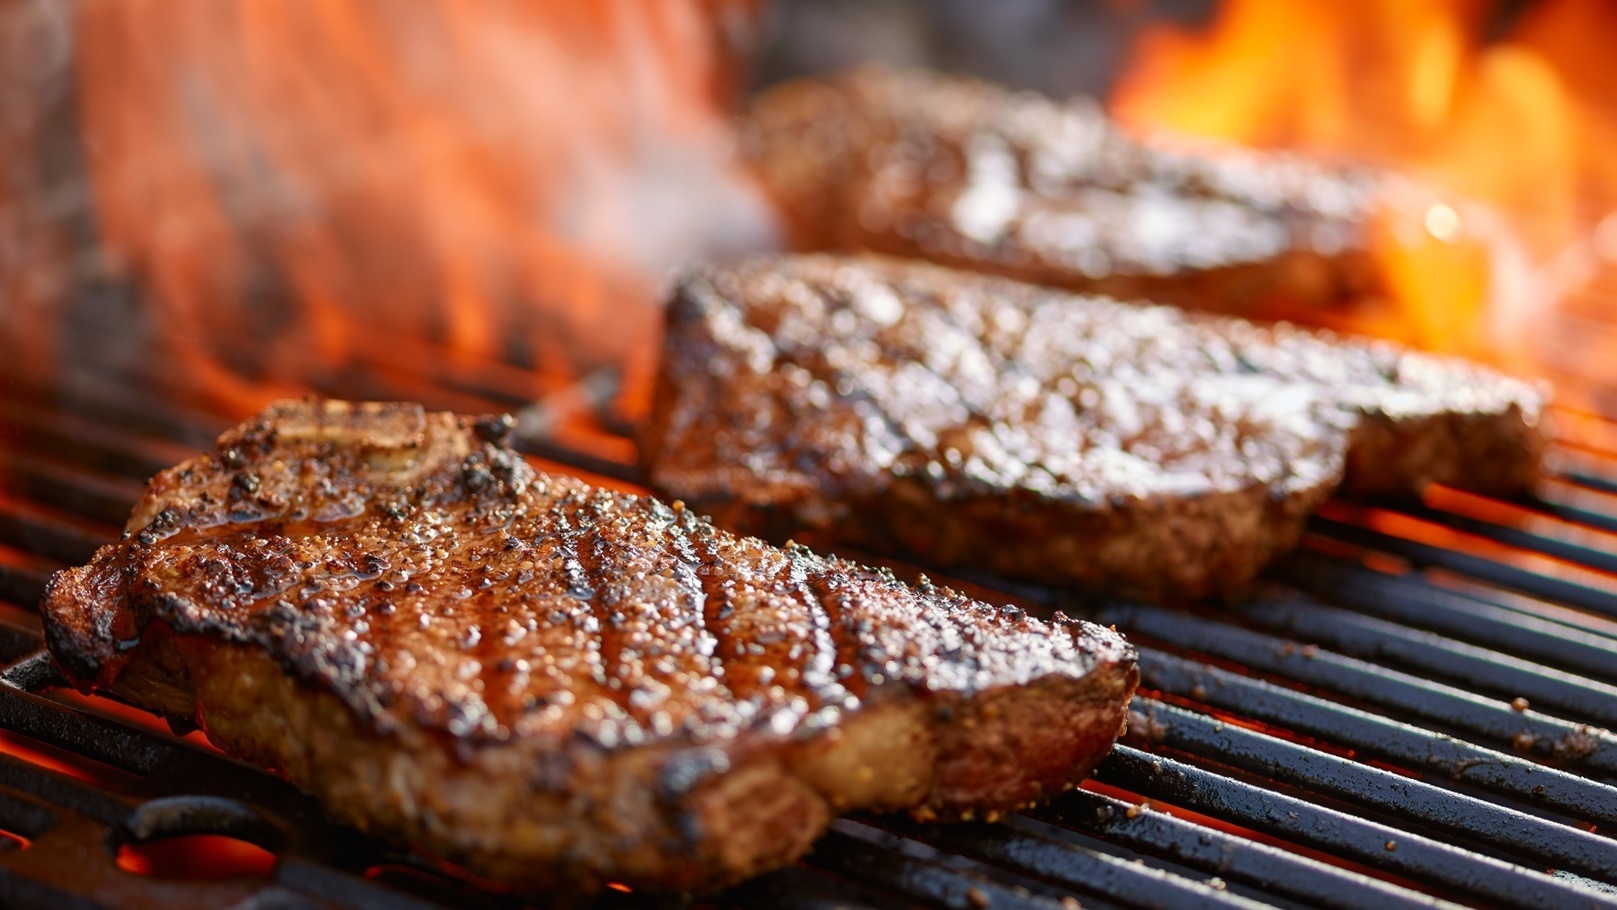 grilling-steaks-on-flaming-grill-and-shot-with-sel-2022-03-26-11-58-49-utc